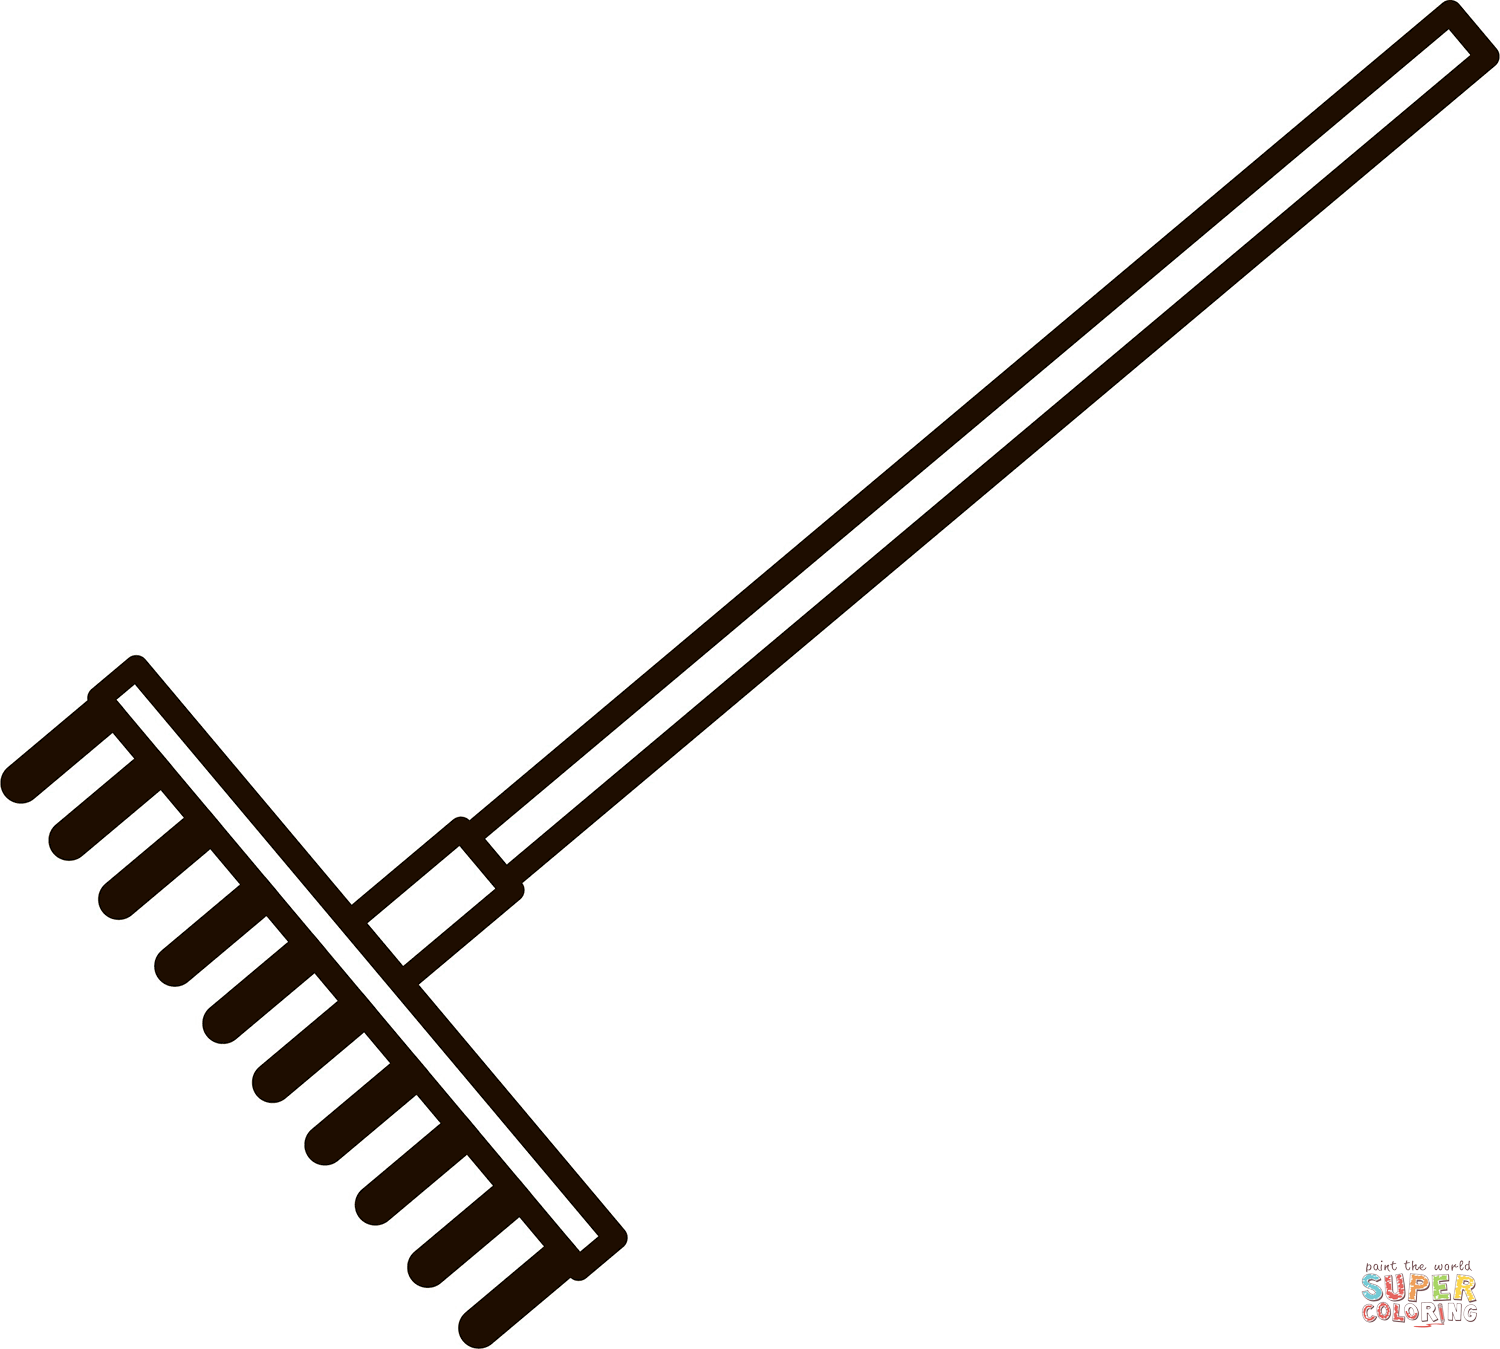 Garden rake coloring page free printable coloring pages